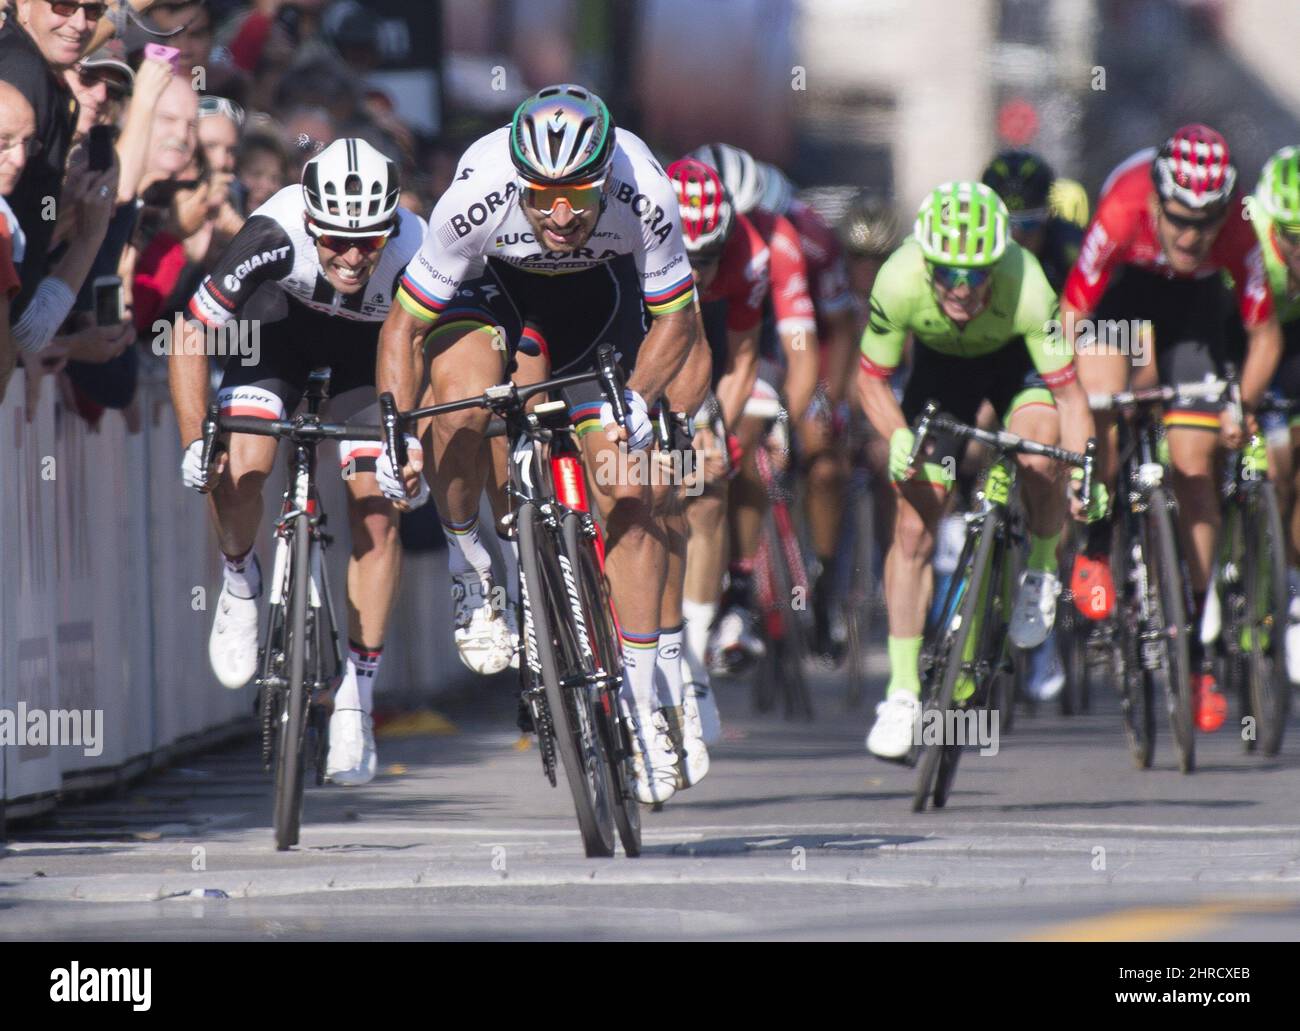 Peter Sagan, centre left, of Slovakia sprints to the finish to win his ...